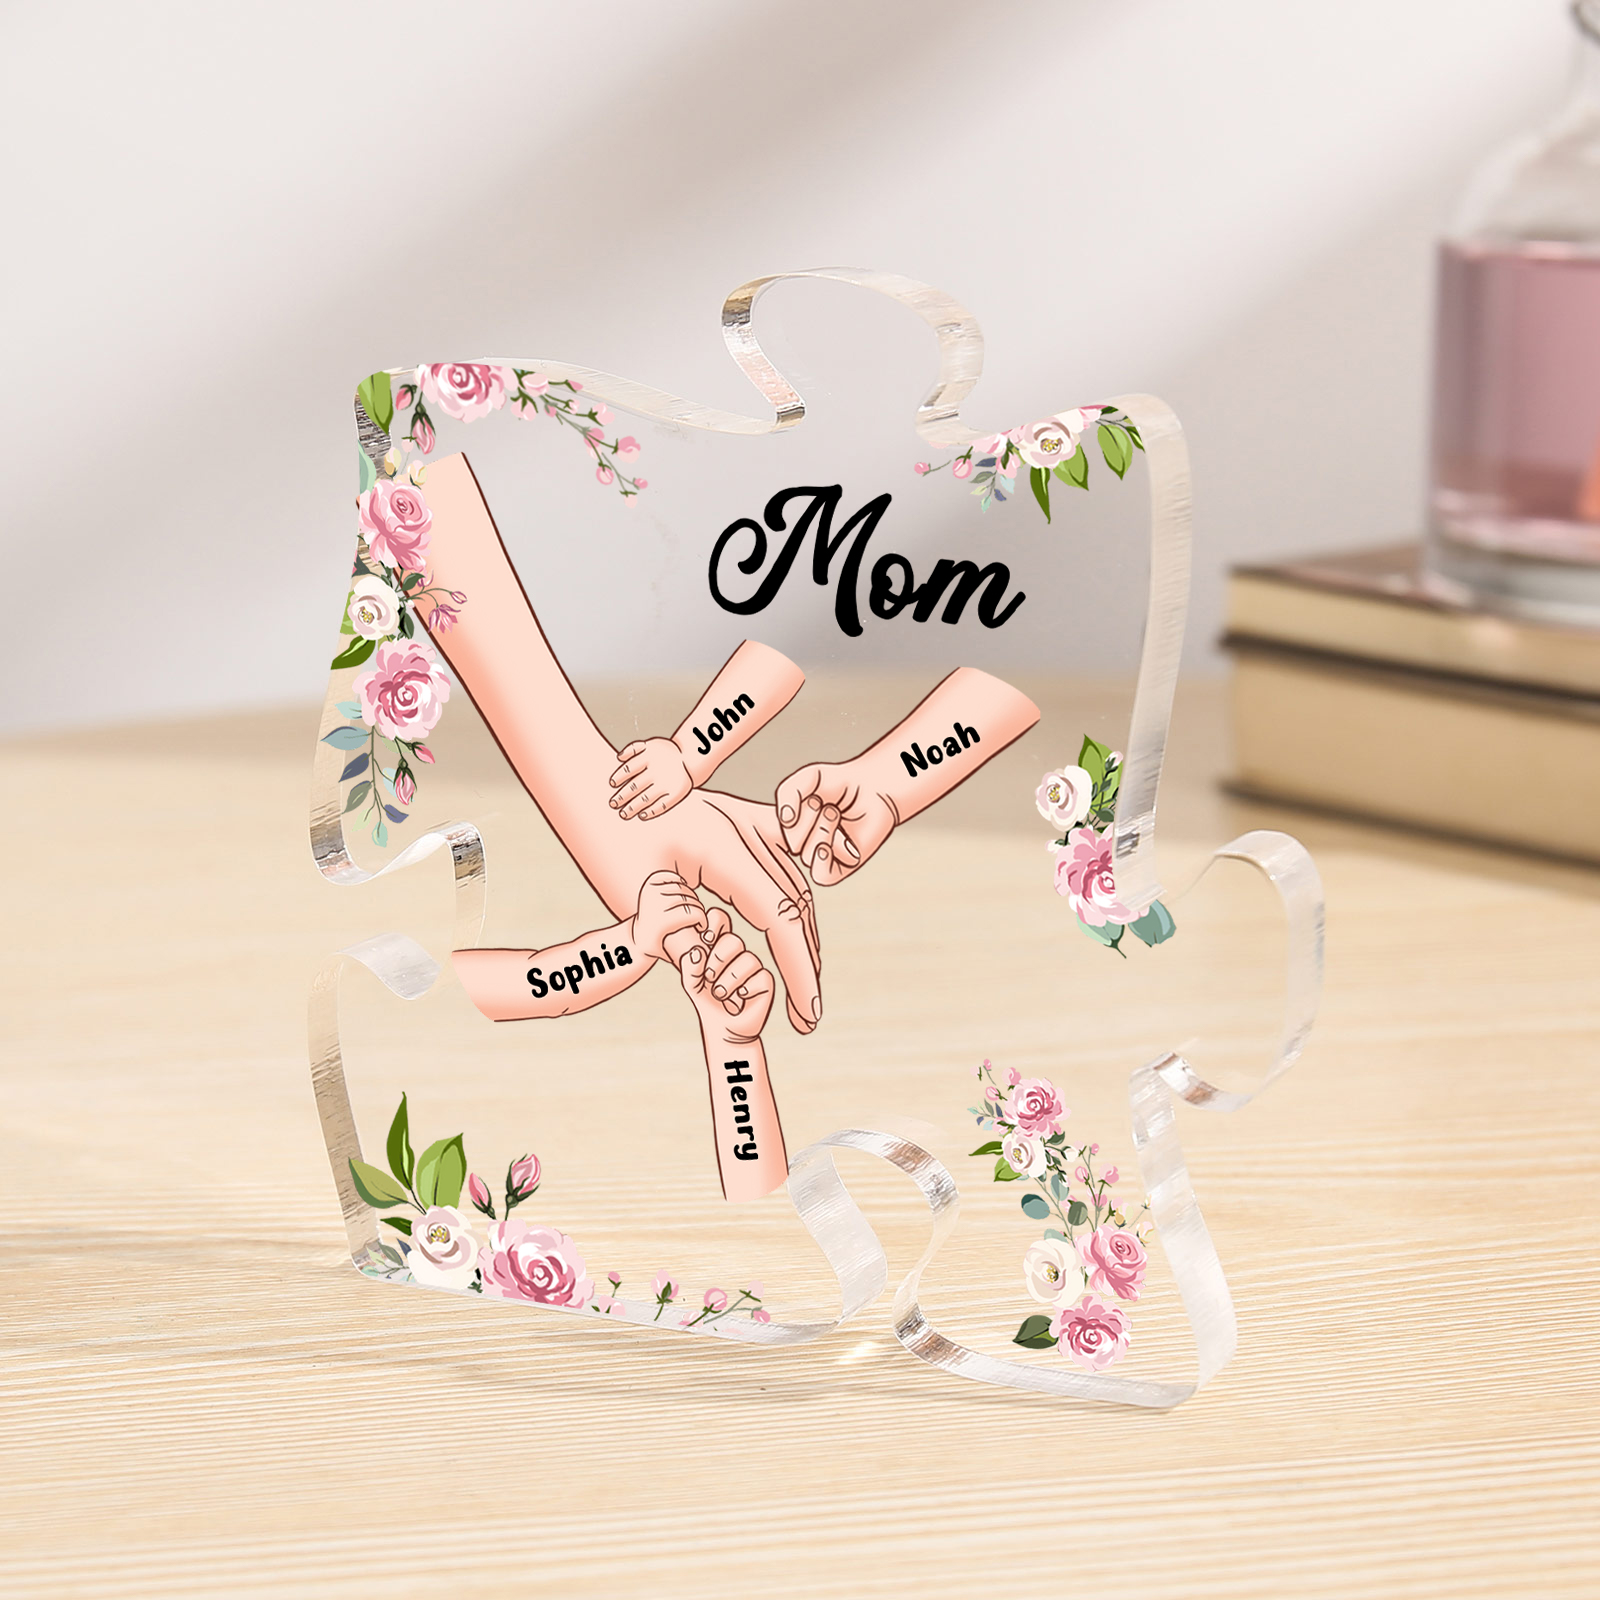 4 Name - Personalized Acrylic Heart Keepsake Customized Name Holding Hands Acrylic Plaque Ornament Mother's Day Gift for Mom